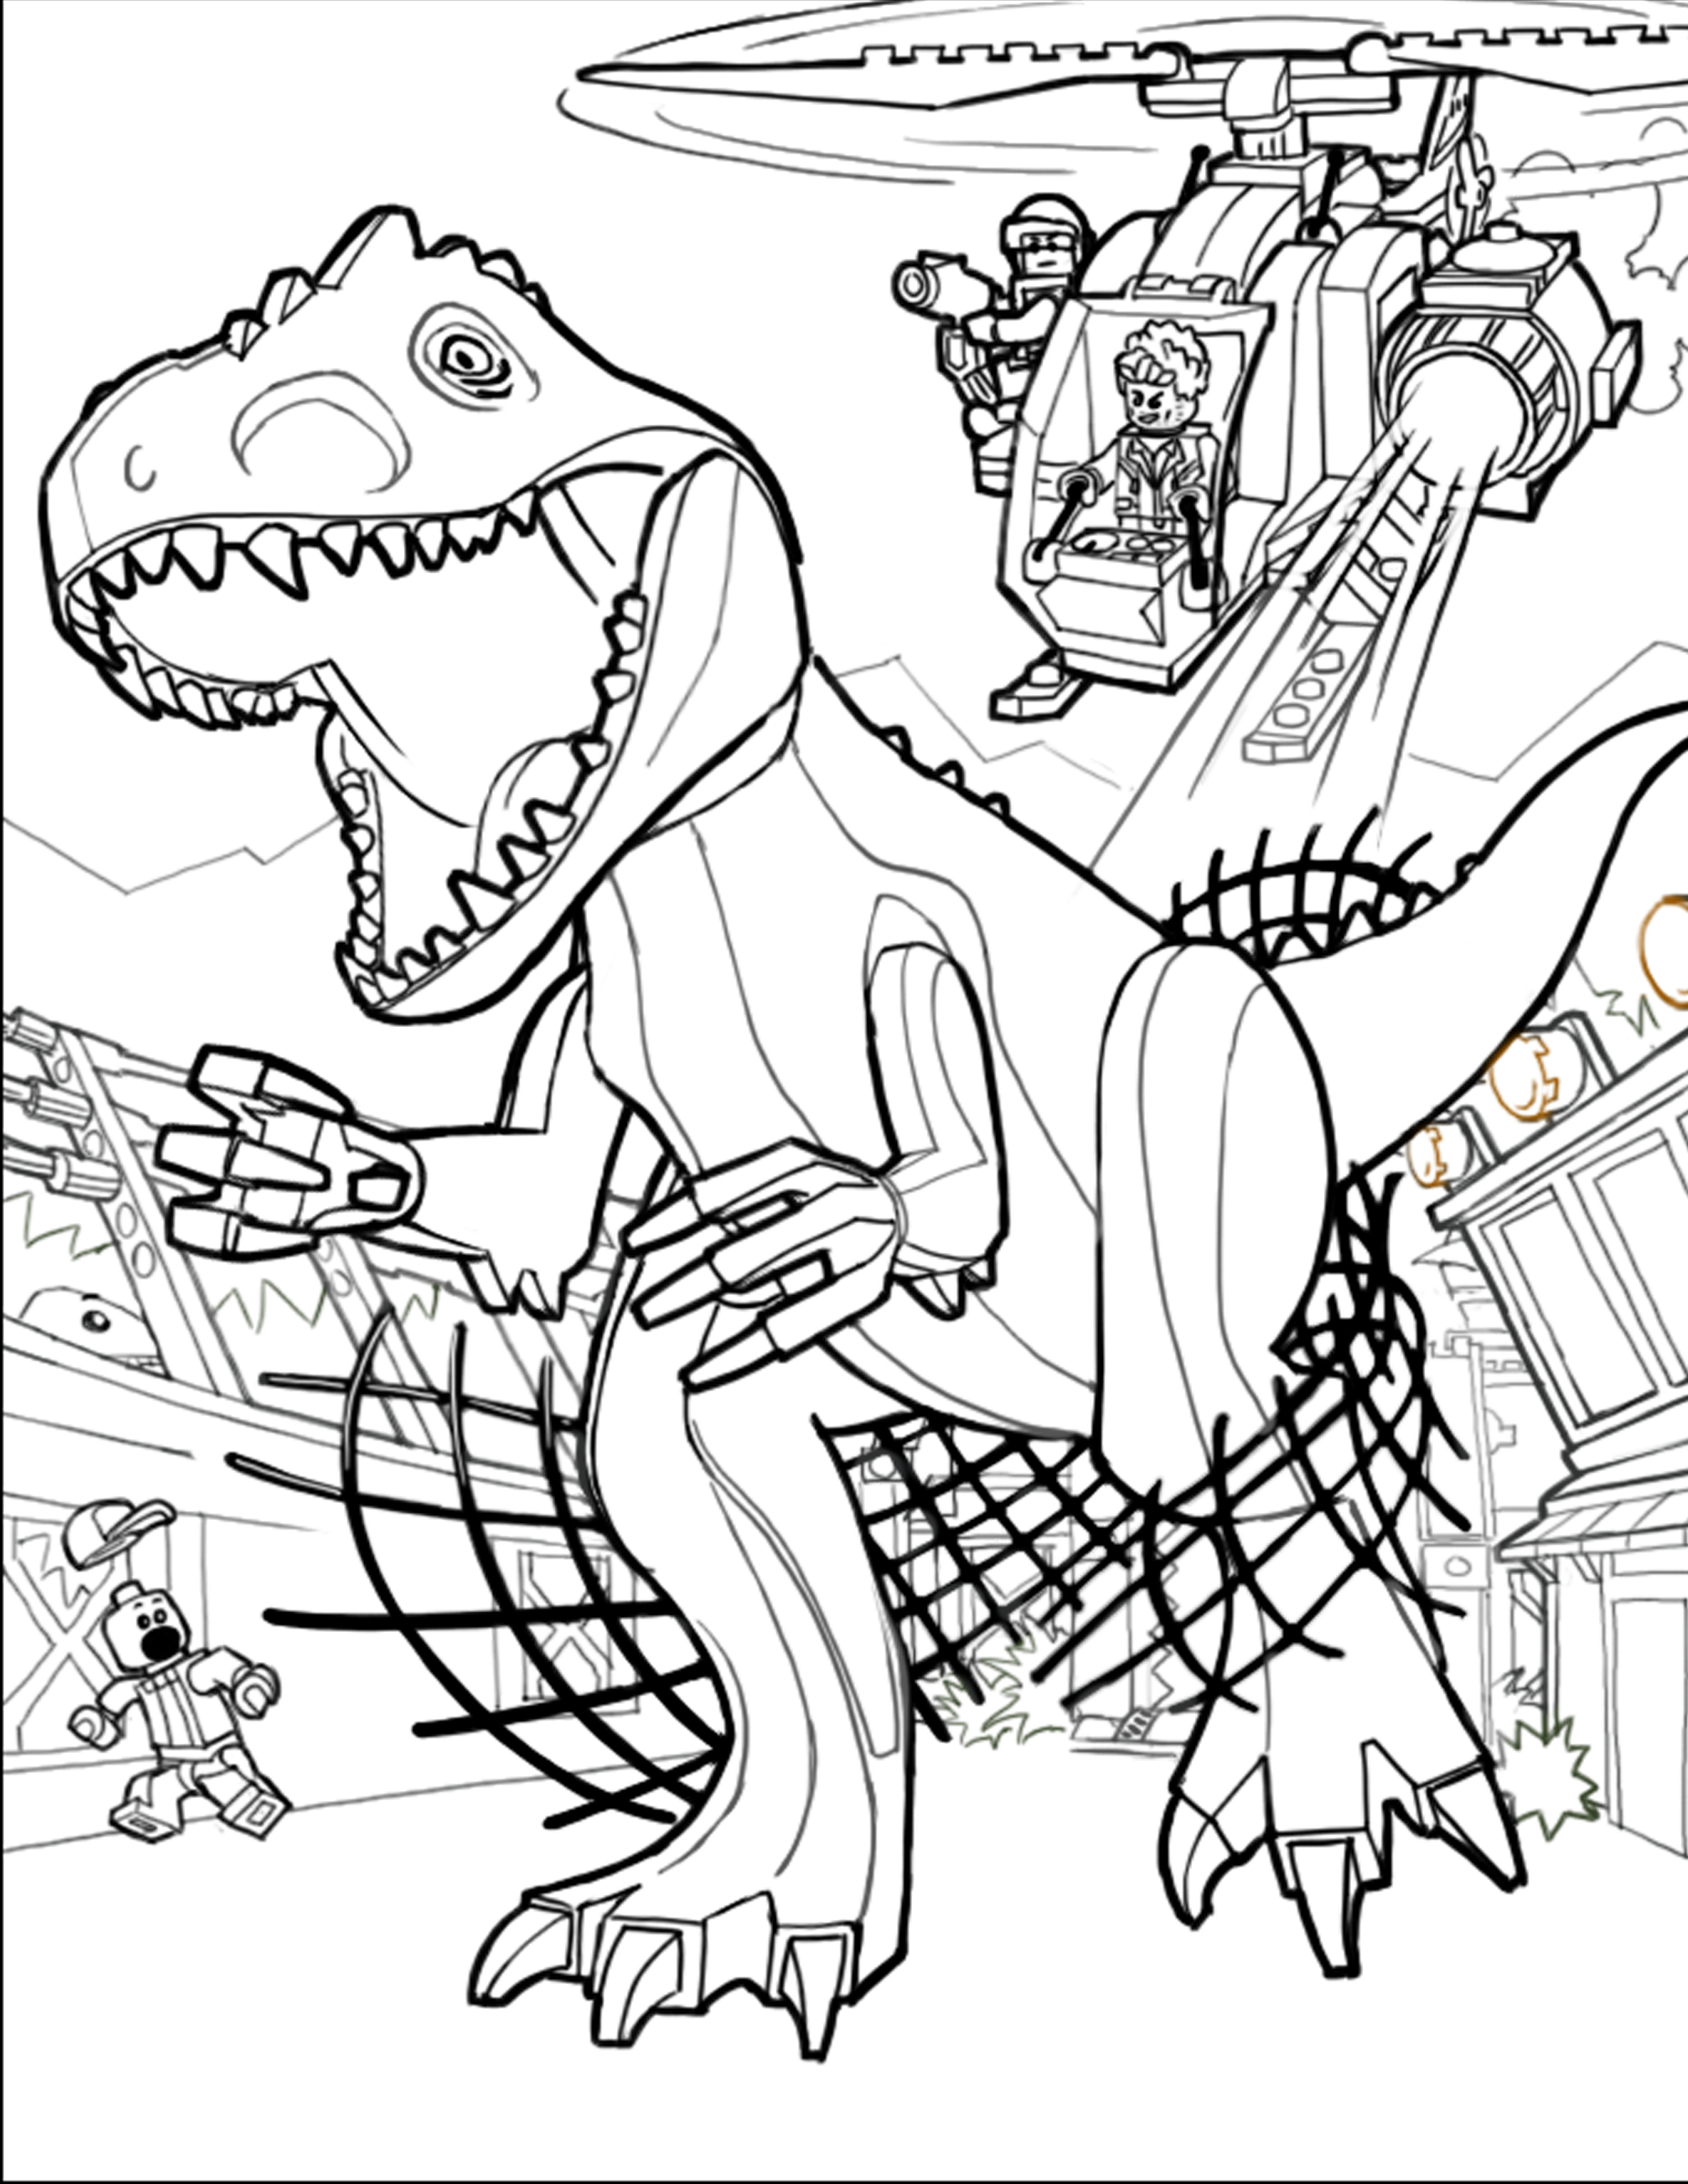 Jurassic Park Coloring Pages Lego Jurassic Park Coloring Pages  Coloringsuite - birijus.com